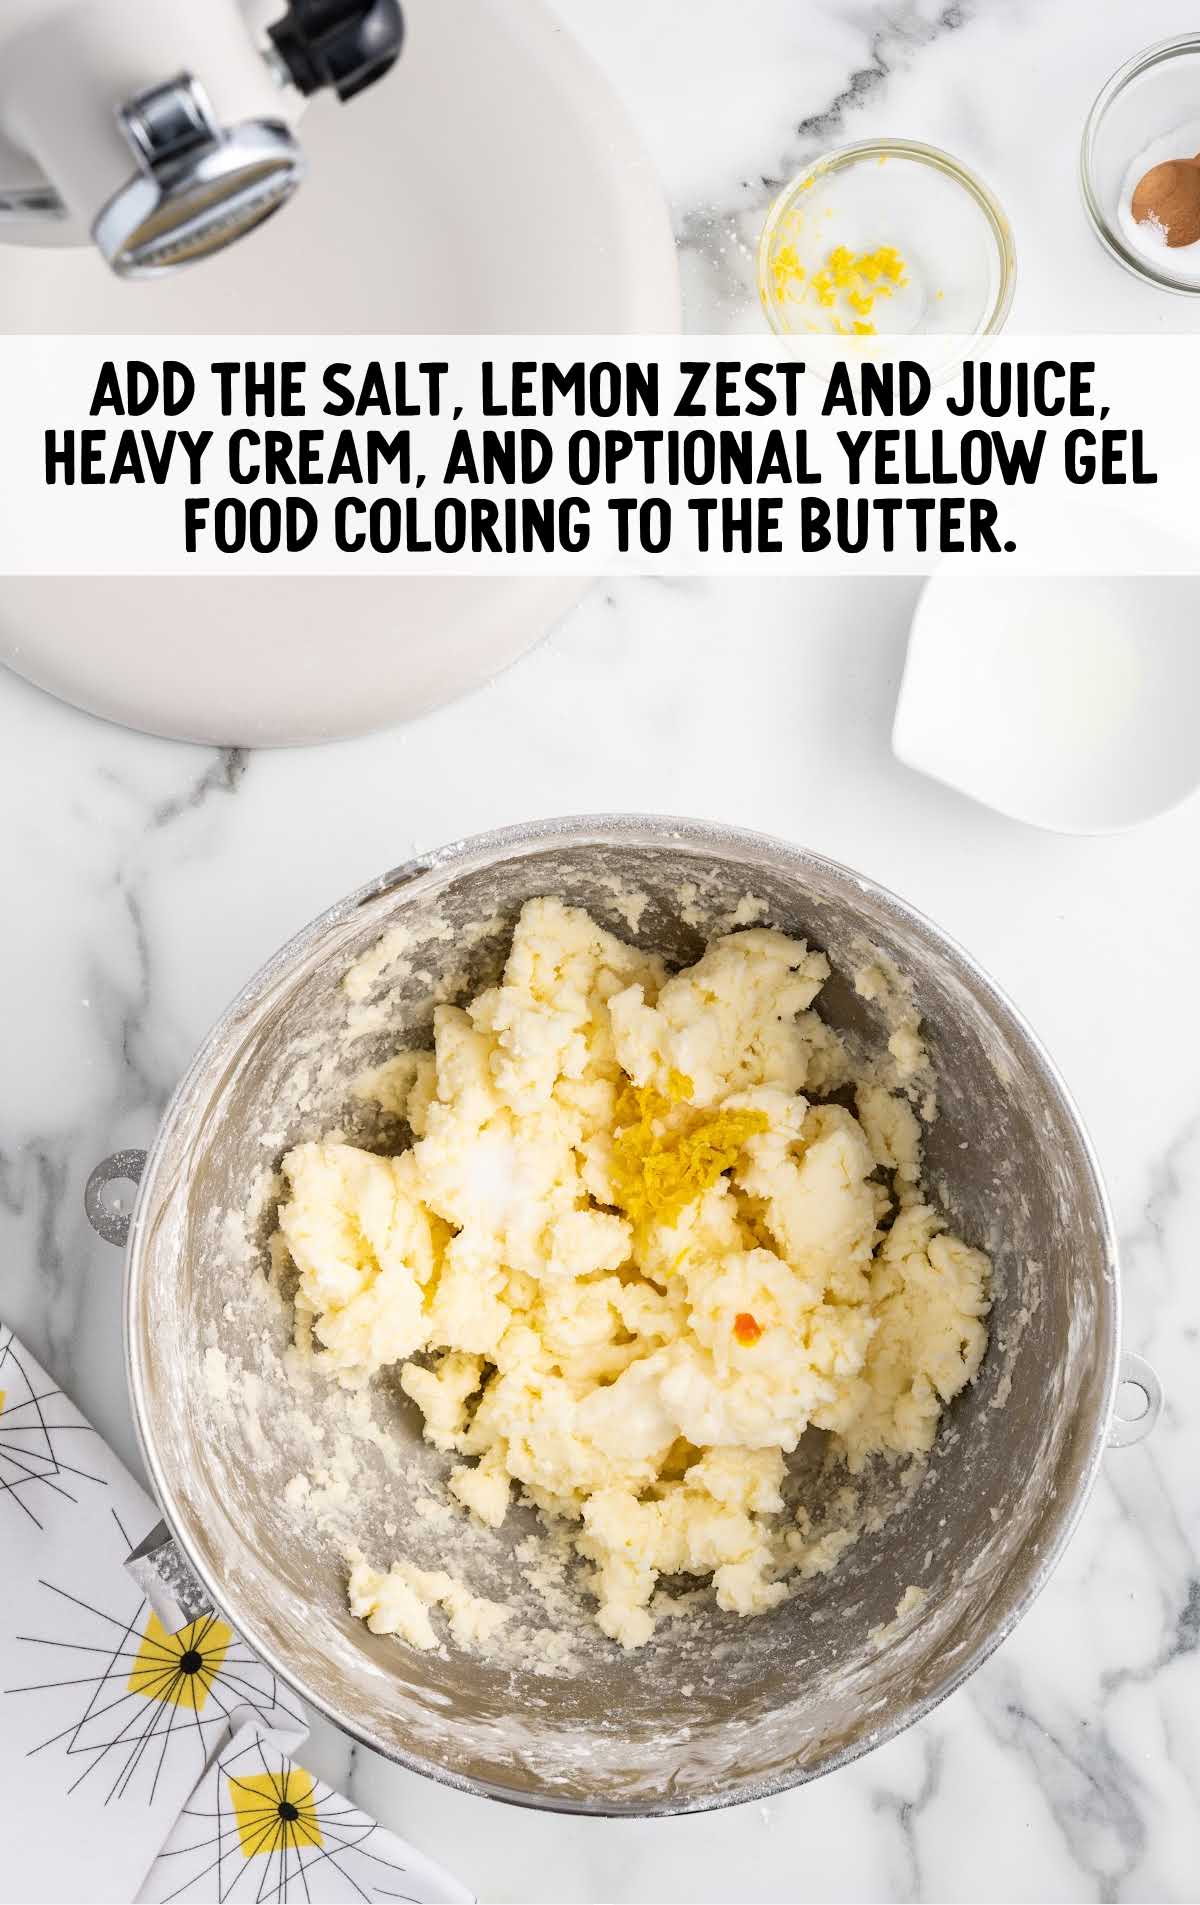 salt, lemon zest and juice, heavy cream, and yellow food coloring added to the butter mixture